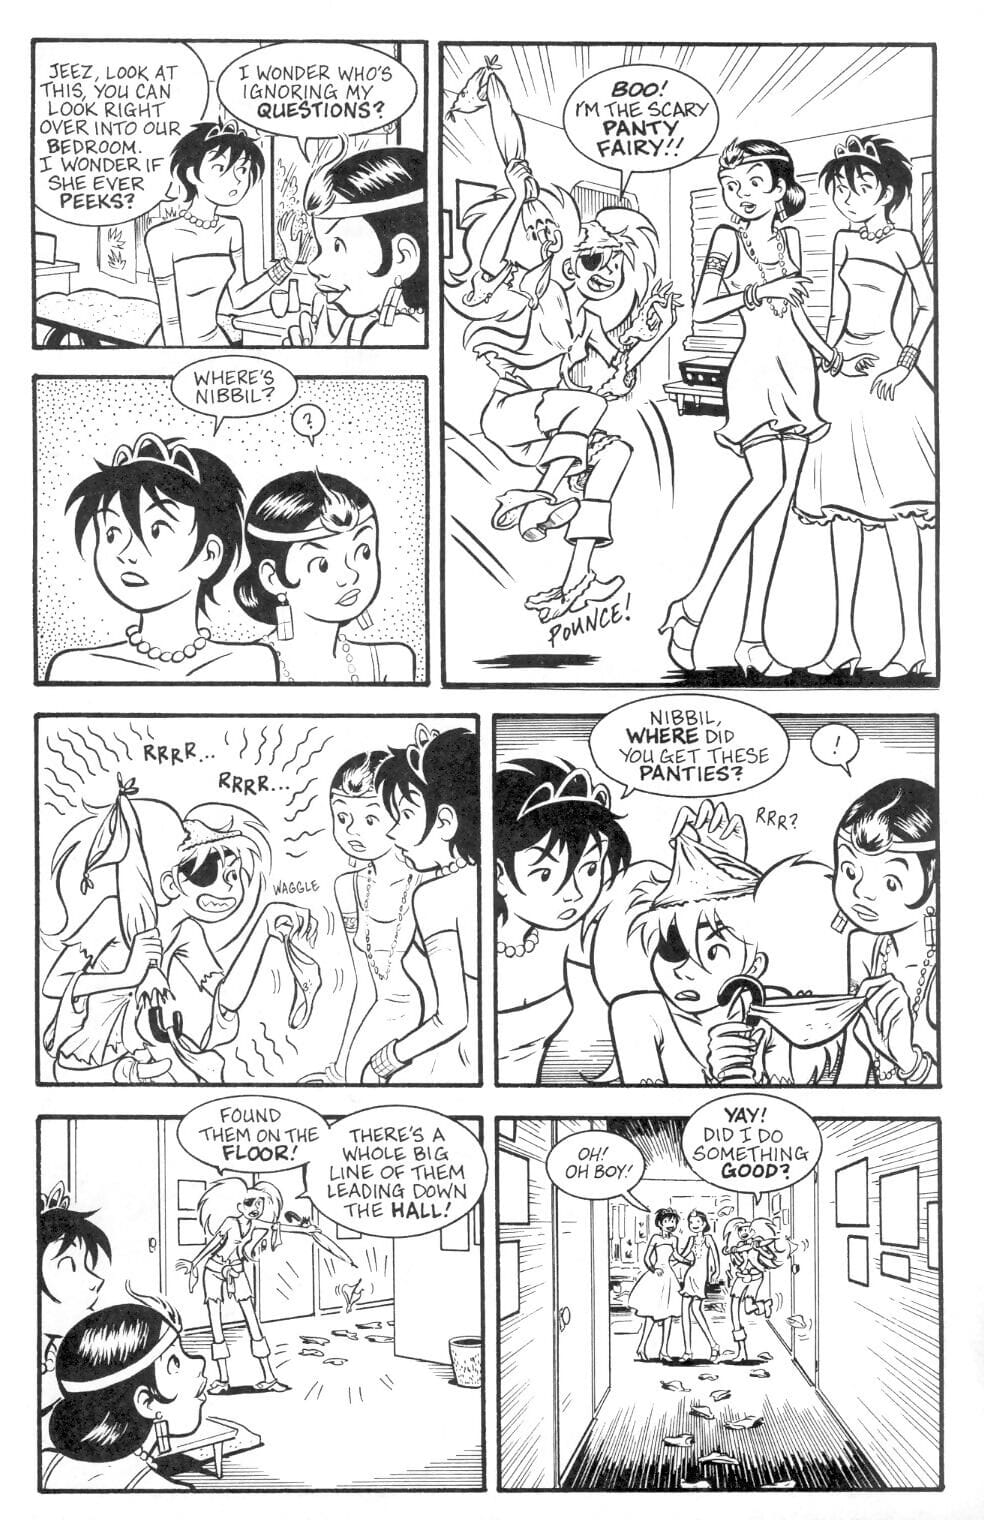 Small Favors Issue #7 ENG page 1